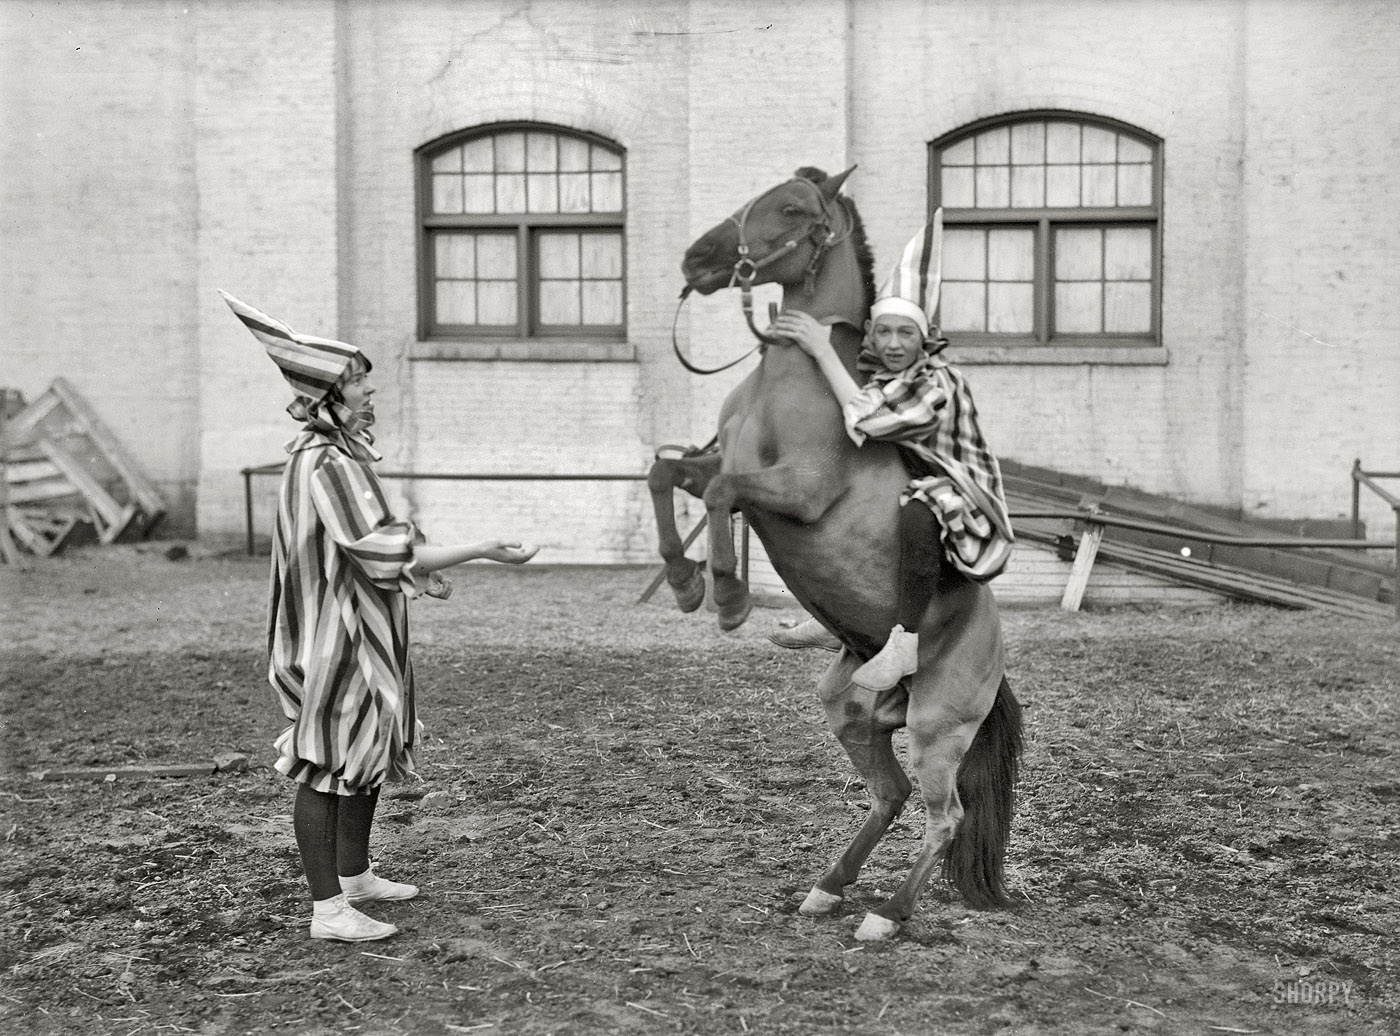 Washington circa 1916. "Society Circus. Clowns and horse." More derring-do from these madcap equestrians. Harris & Ewing glass negative. View full size.